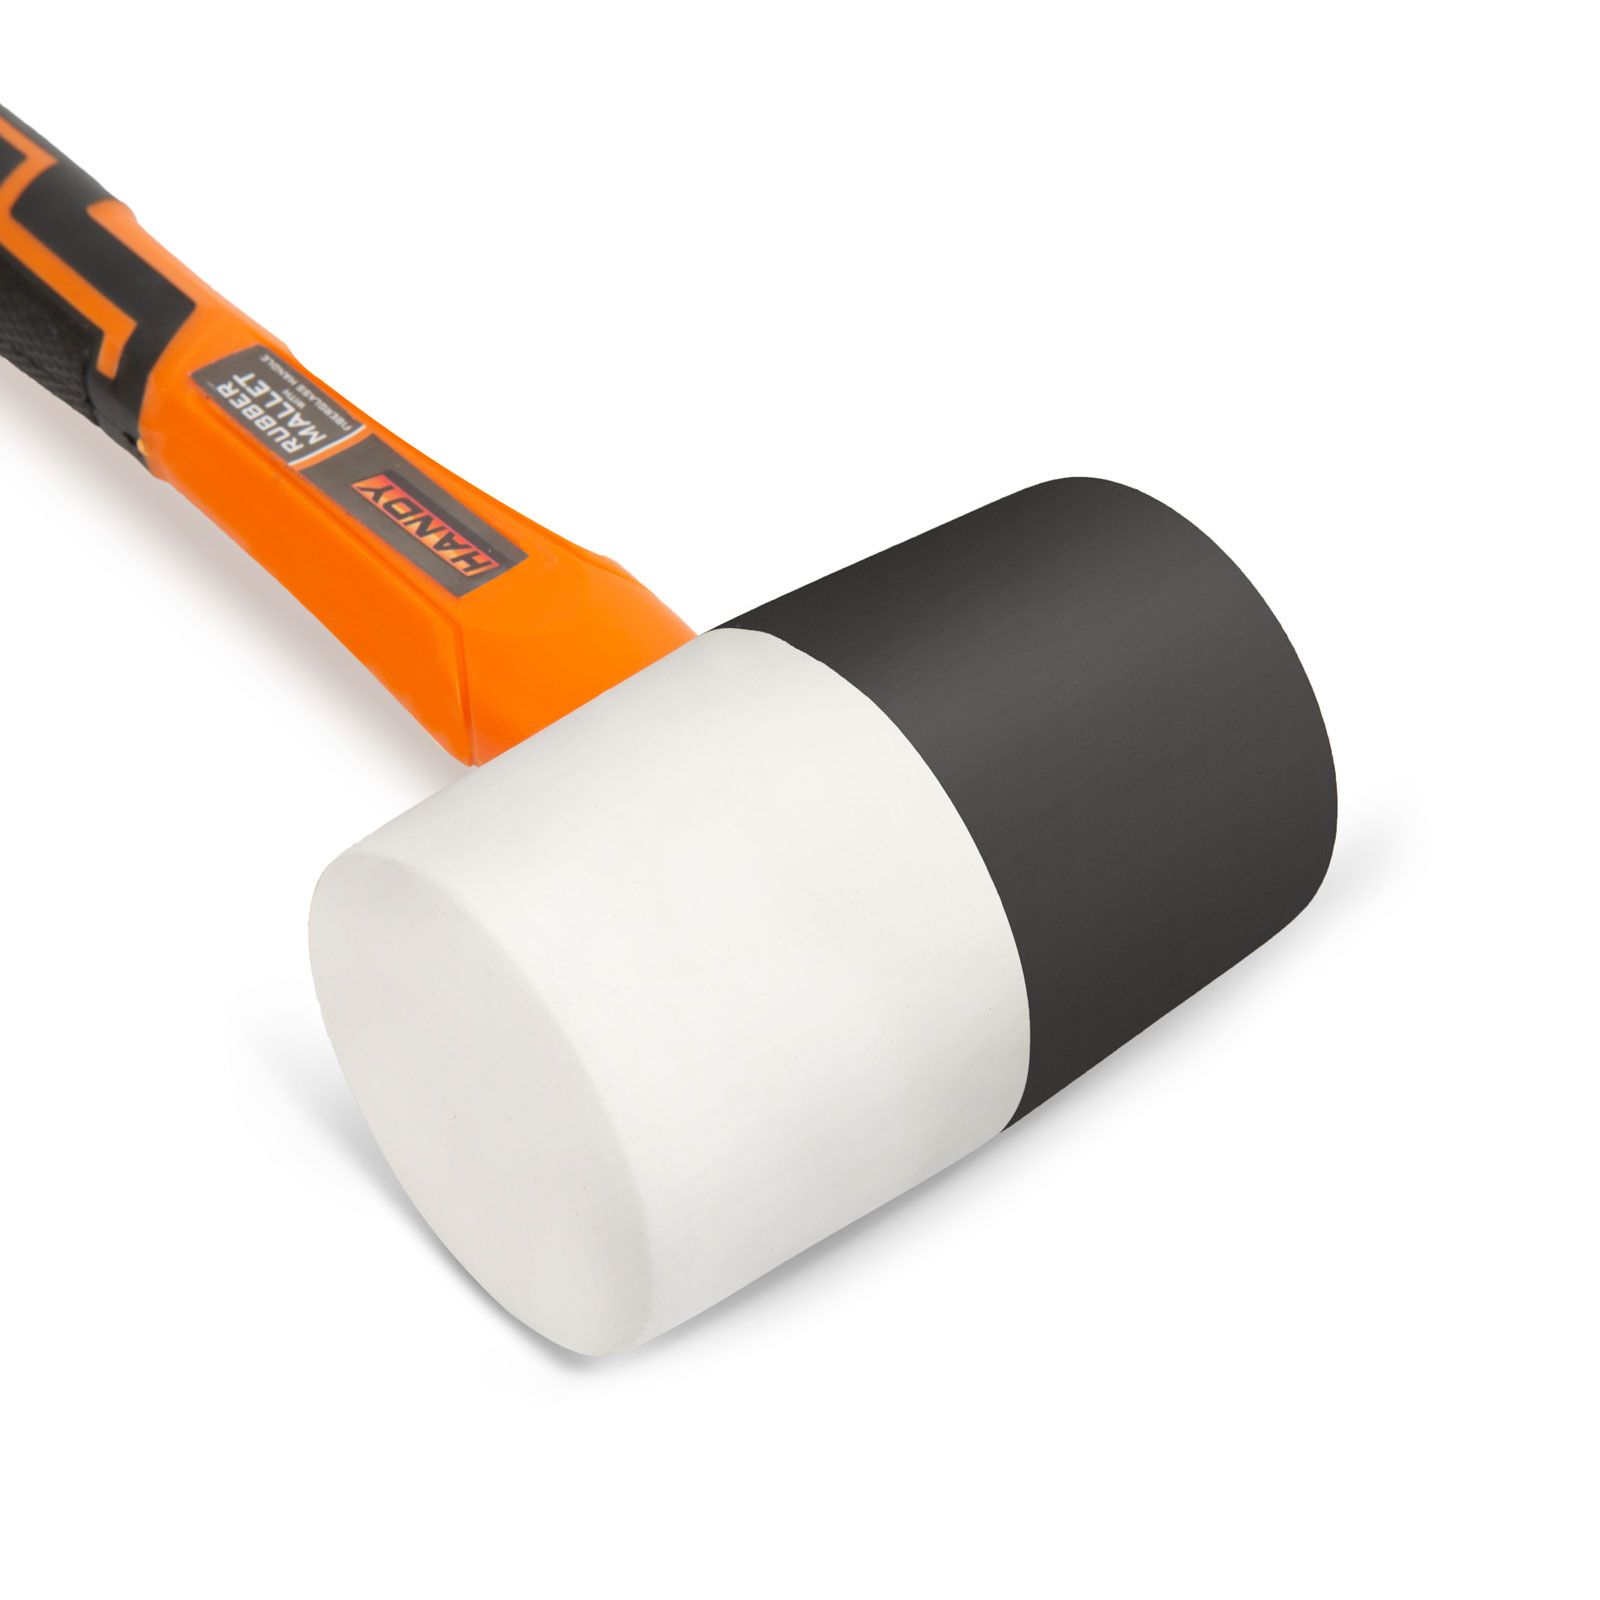 Rubber mallet with fiberglass handle - 450 g thumb